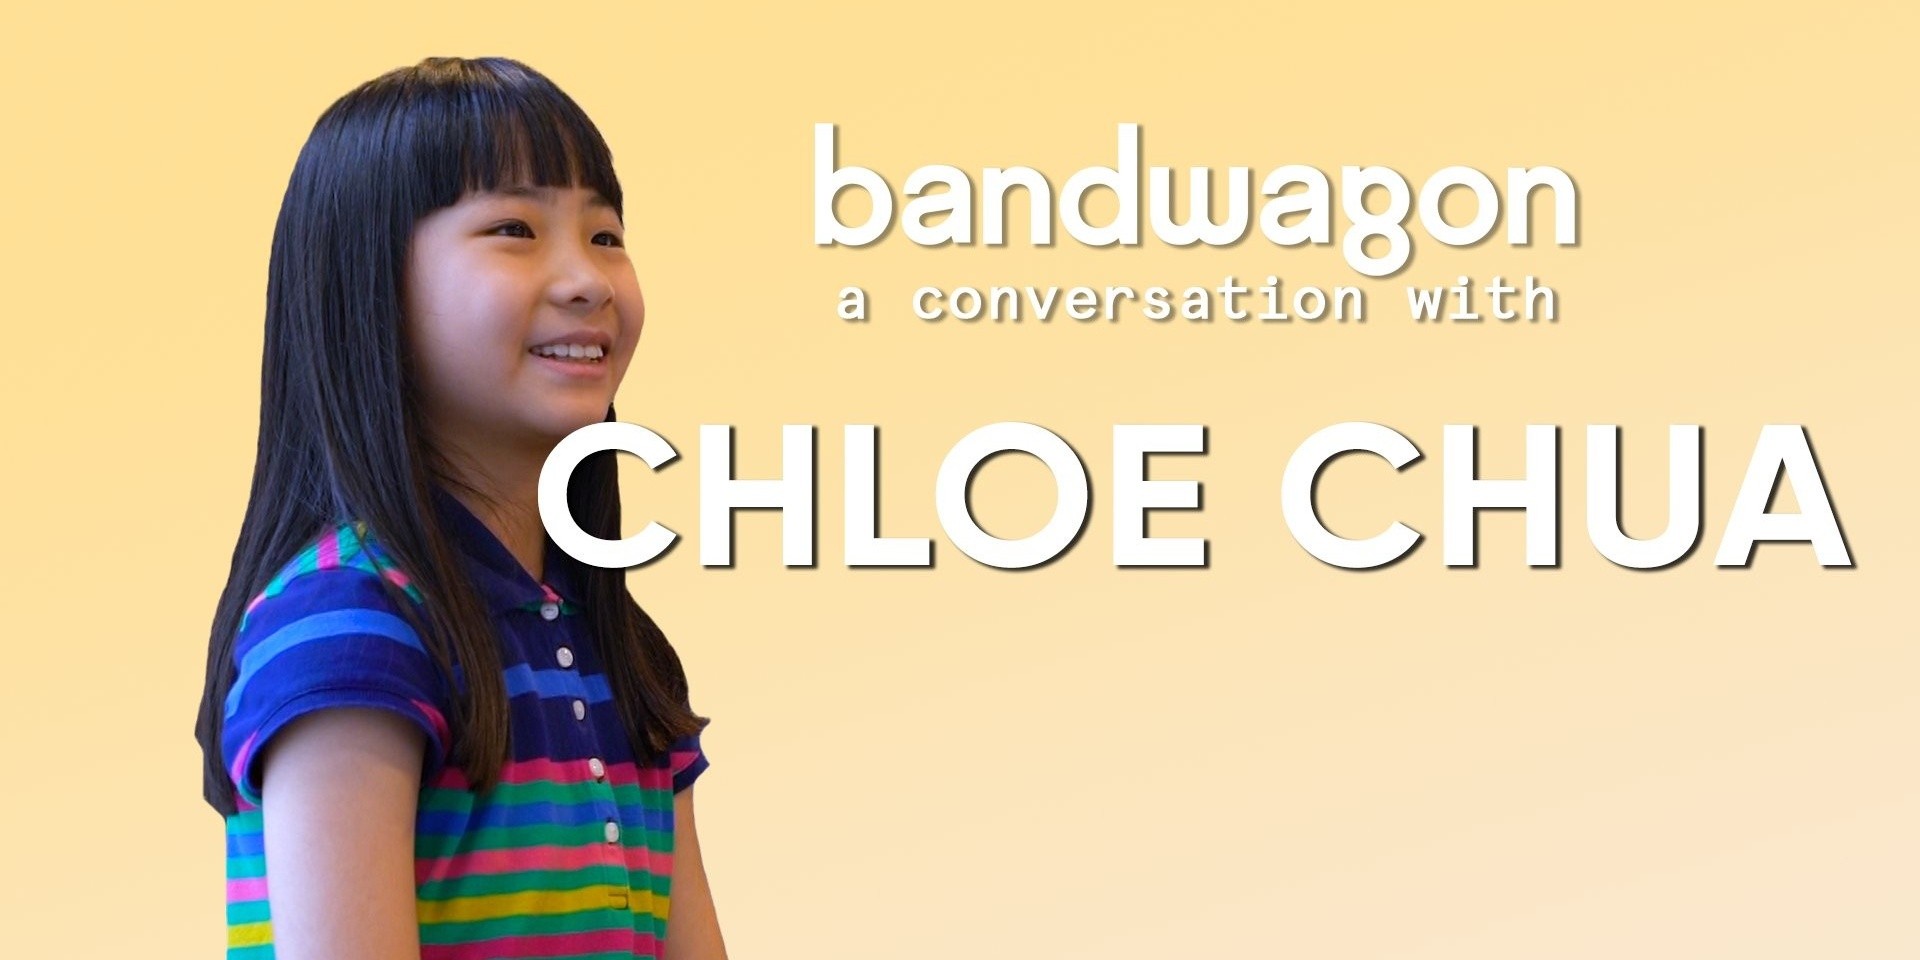 11-year-old violin prodigy Chloe Chua on how she found her calling – watch 